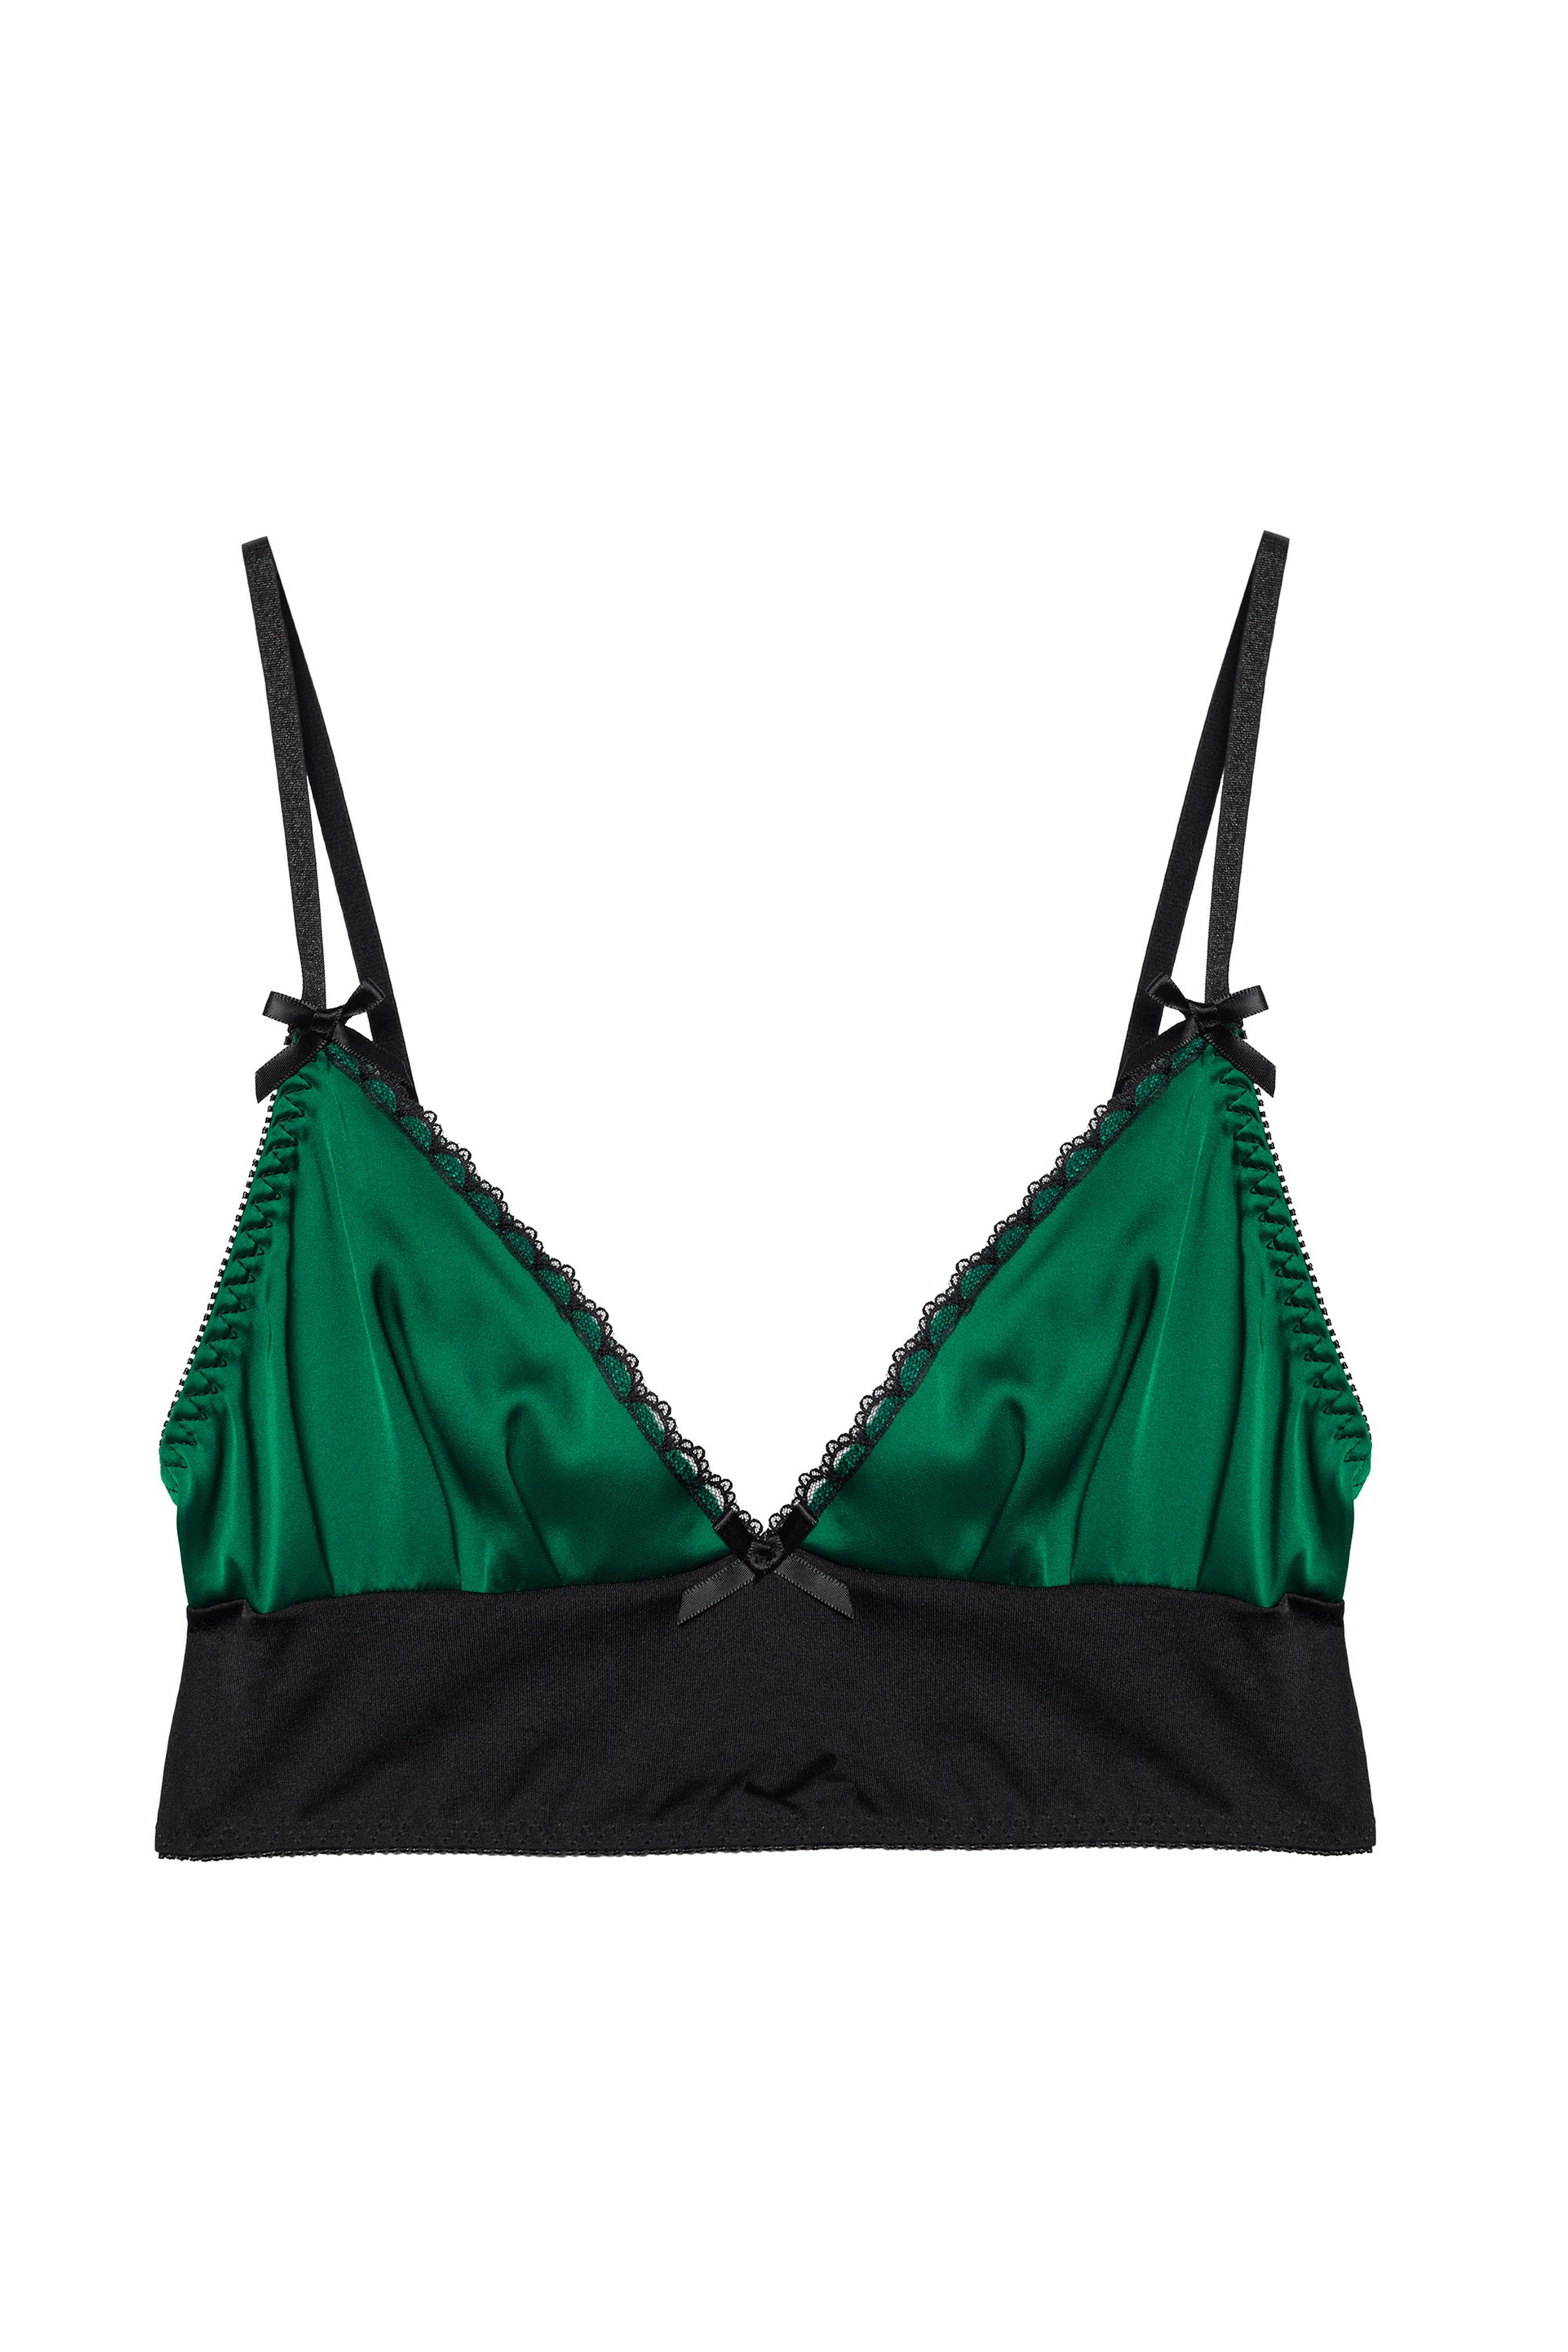 Emerald Green All Over Lace Harness Bralette